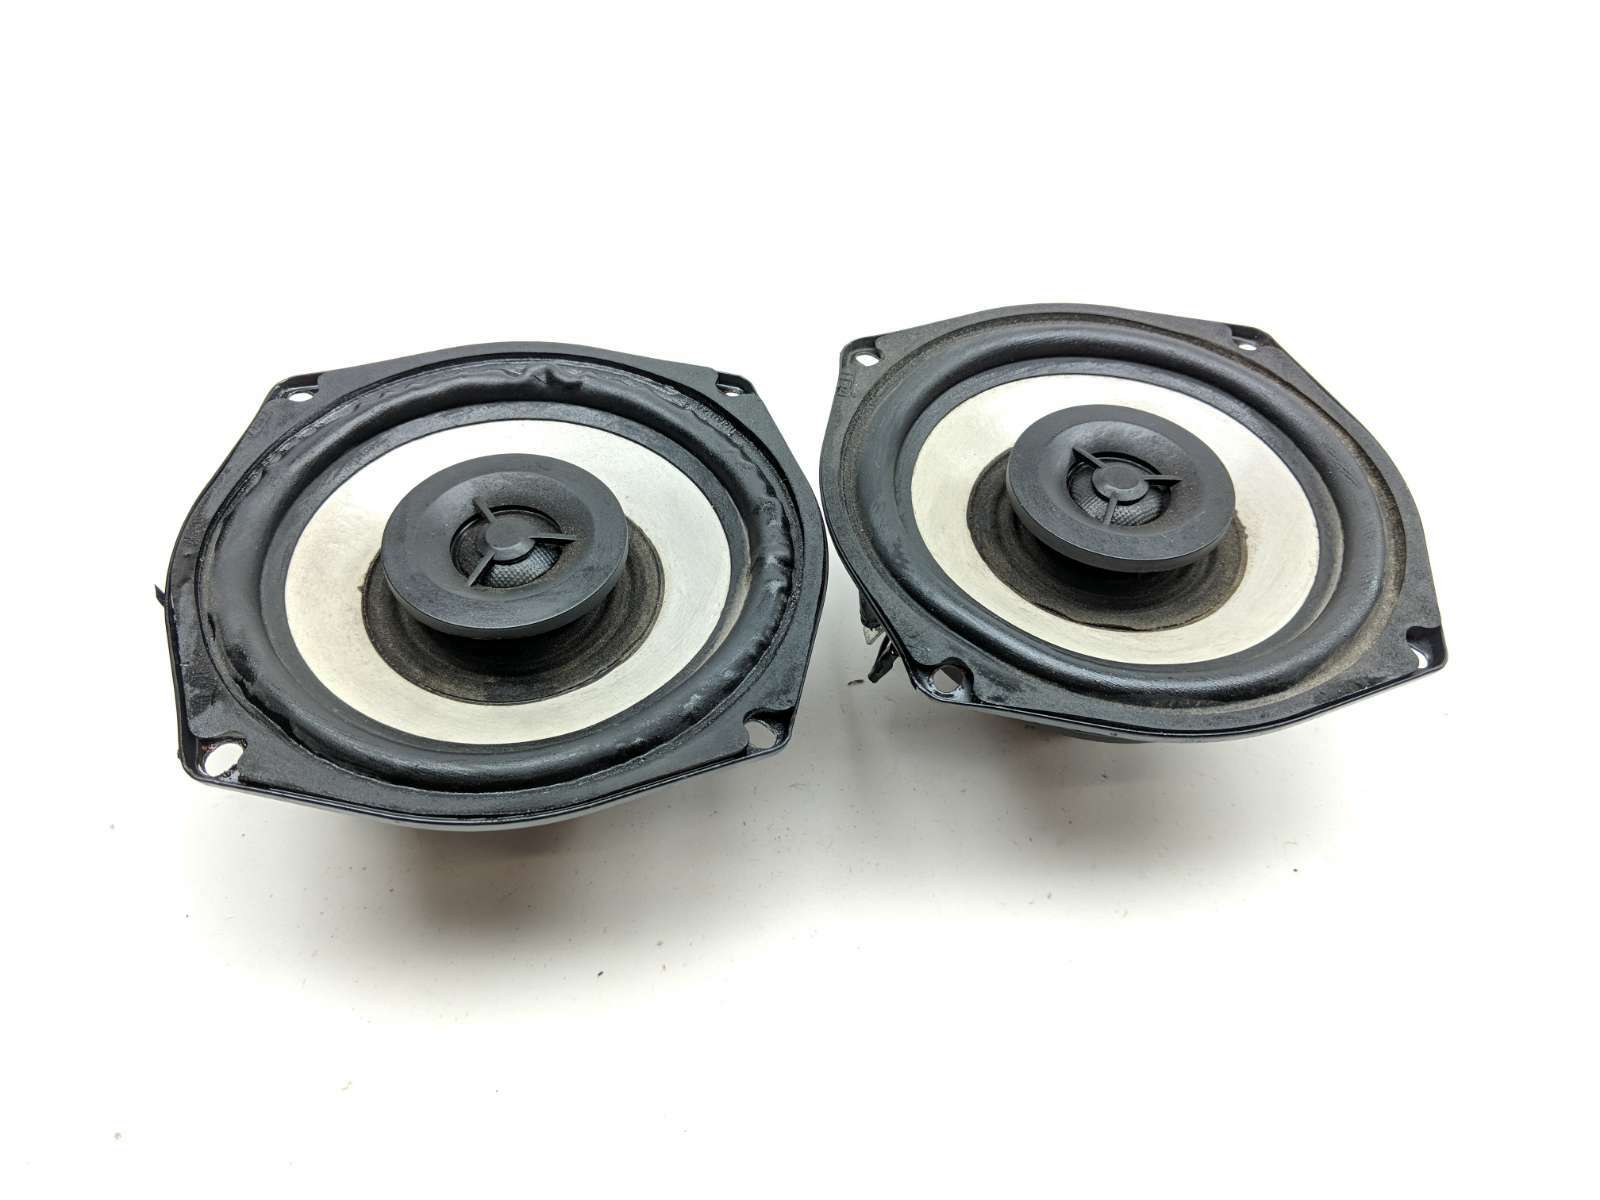 08 Harley Ultra Classic Electra Glide FLHTCUI Front Speakers 77029-06